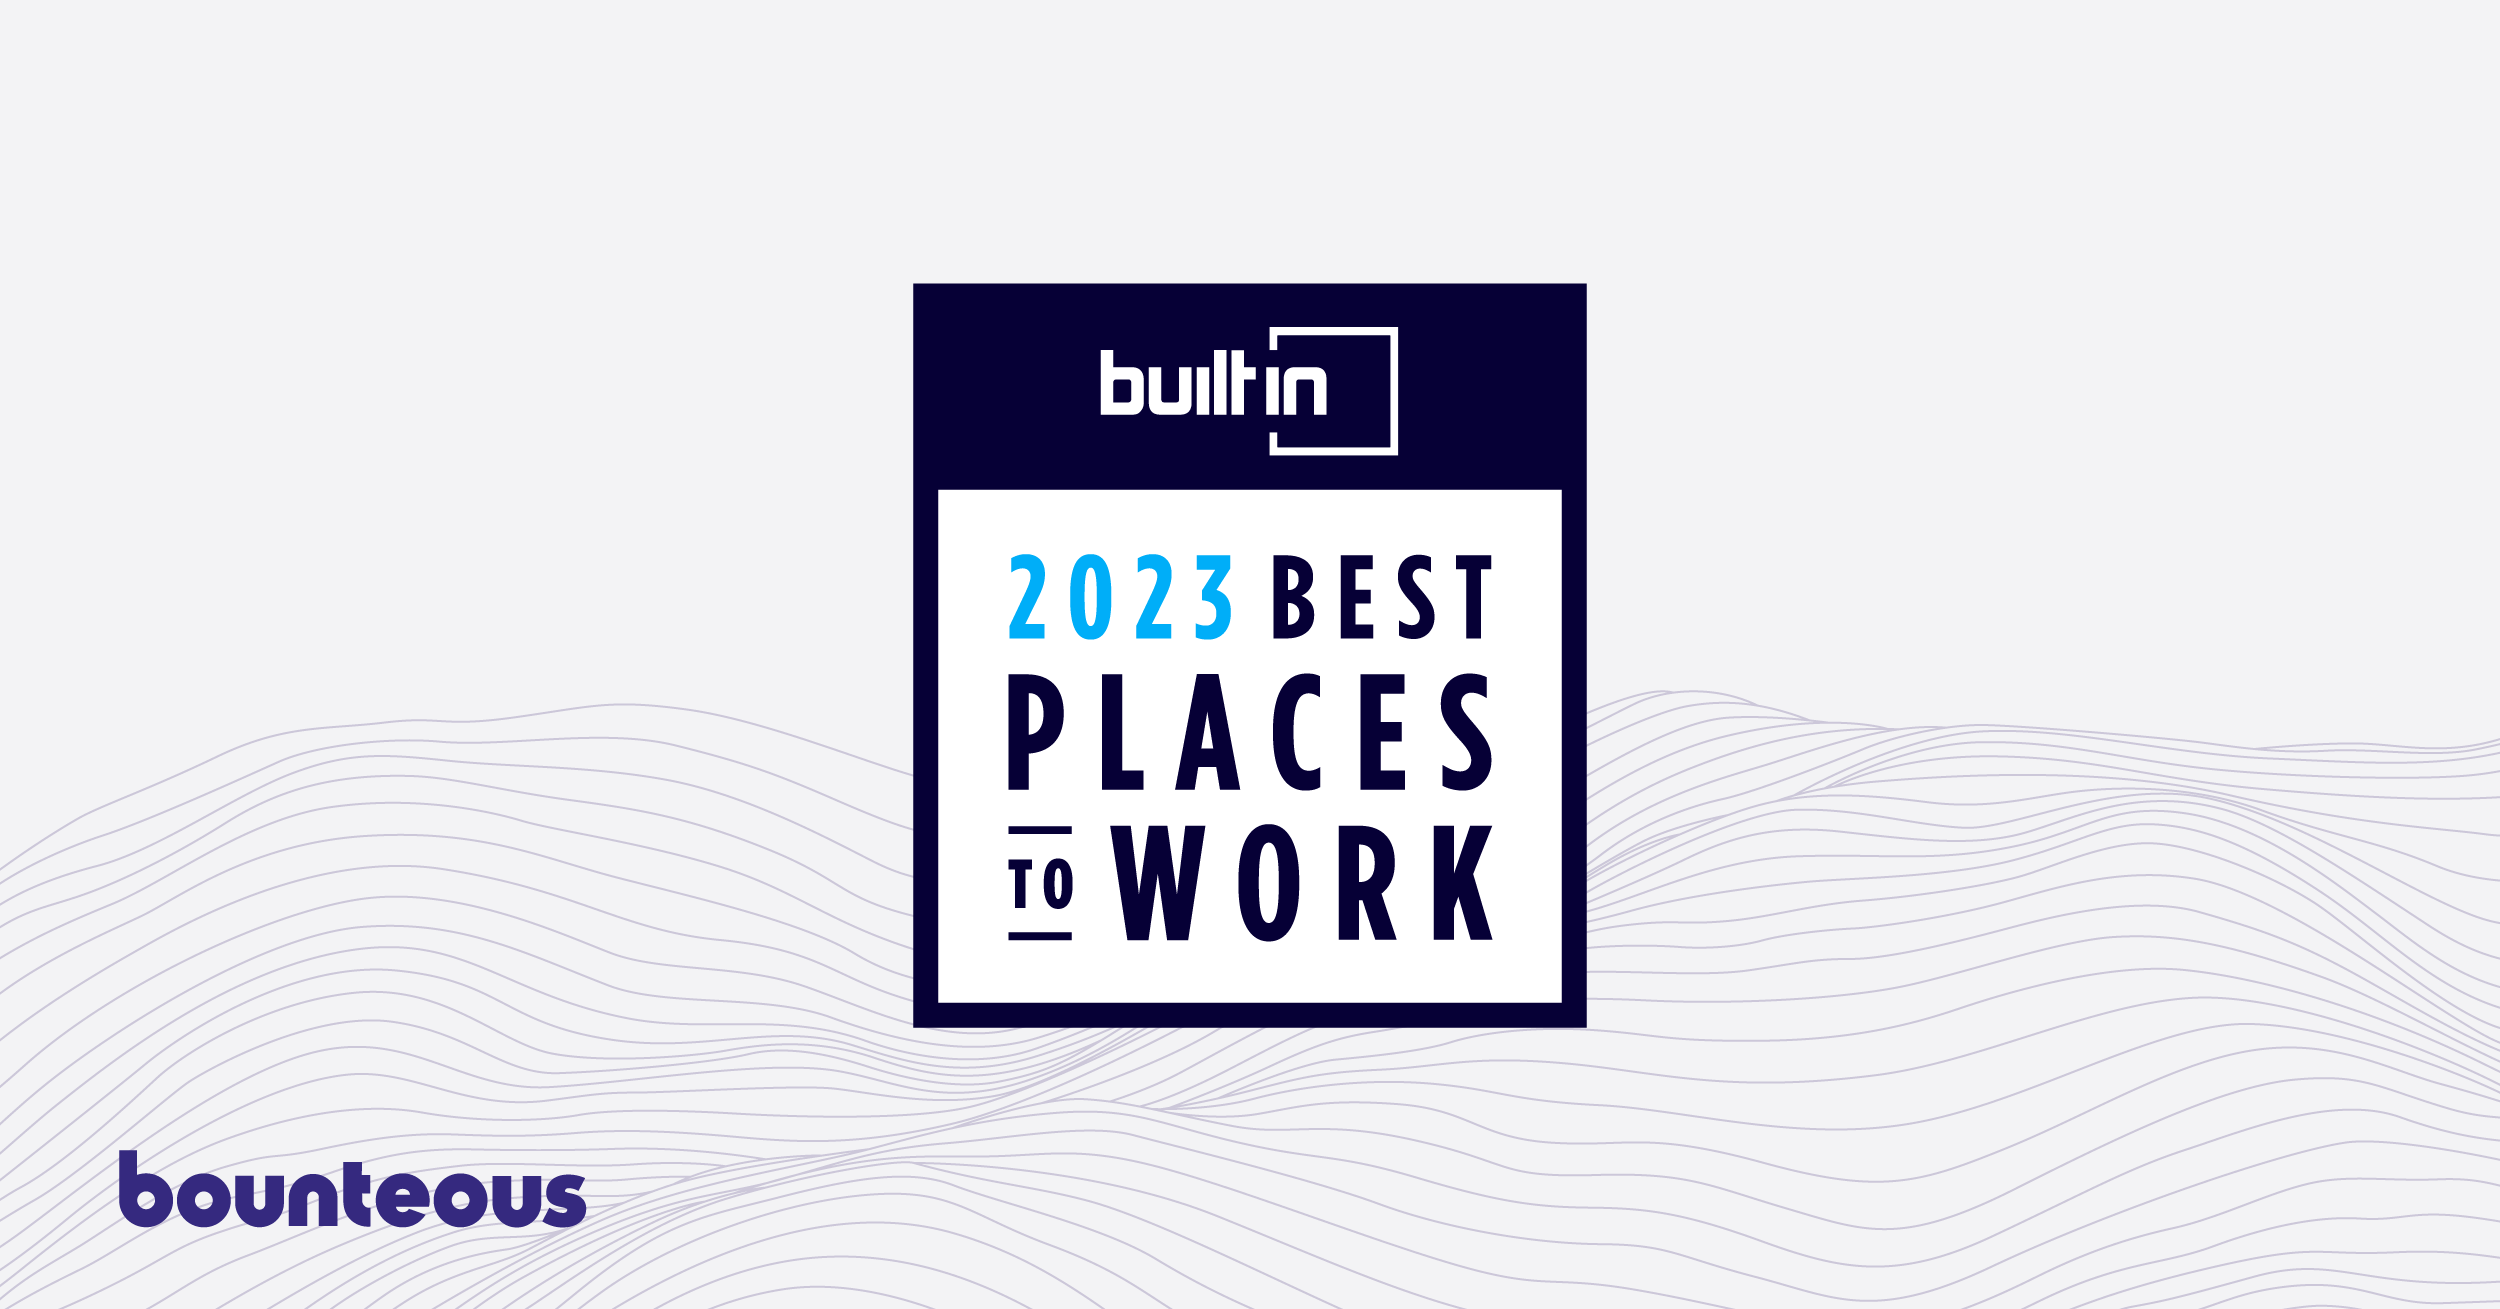 Press Release: Built In Honors Bounteous in 2023 Best Hybrid Places To Work Awards | Bounteous